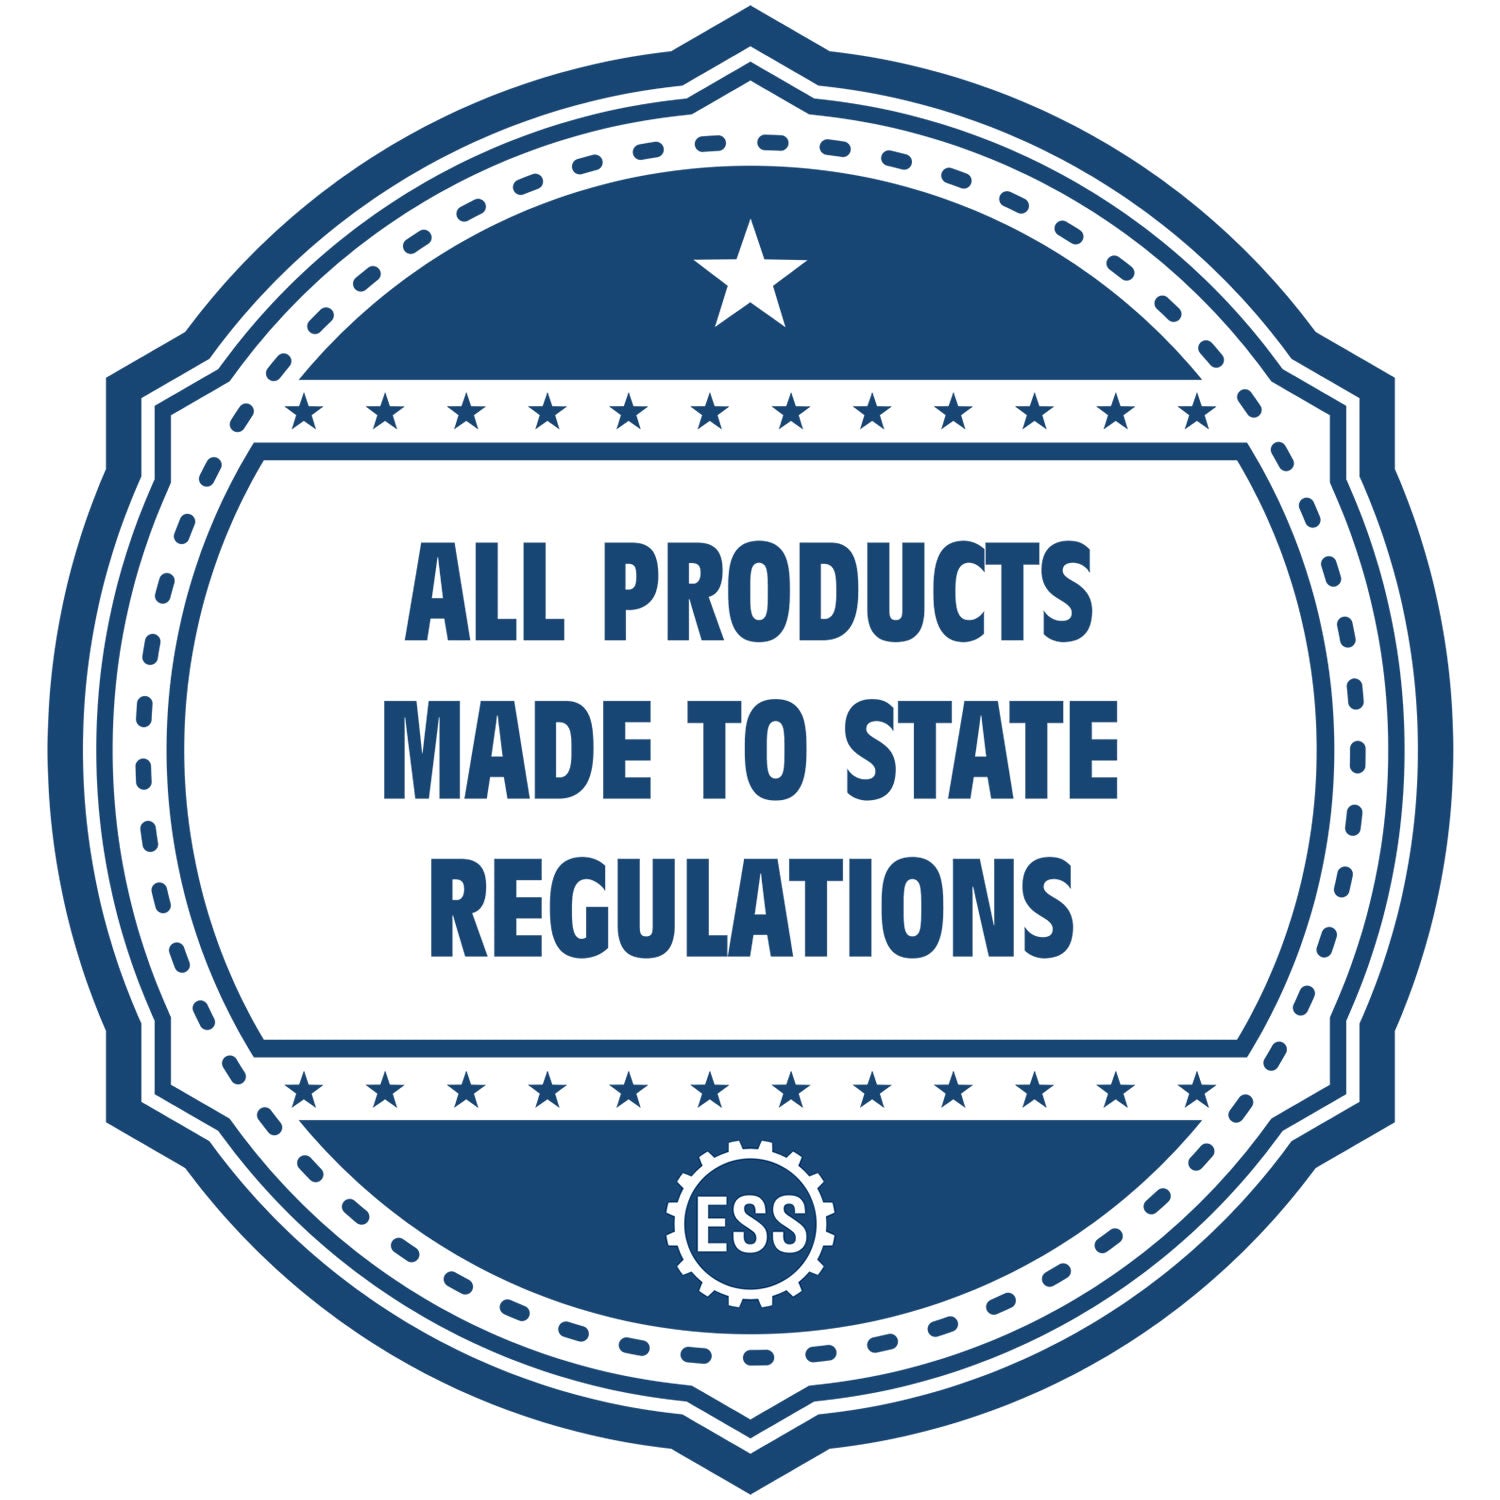 An icon or badge element for the Virginia Desk Surveyor Seal Embosser showing that this product is made in compliance with state regulations.